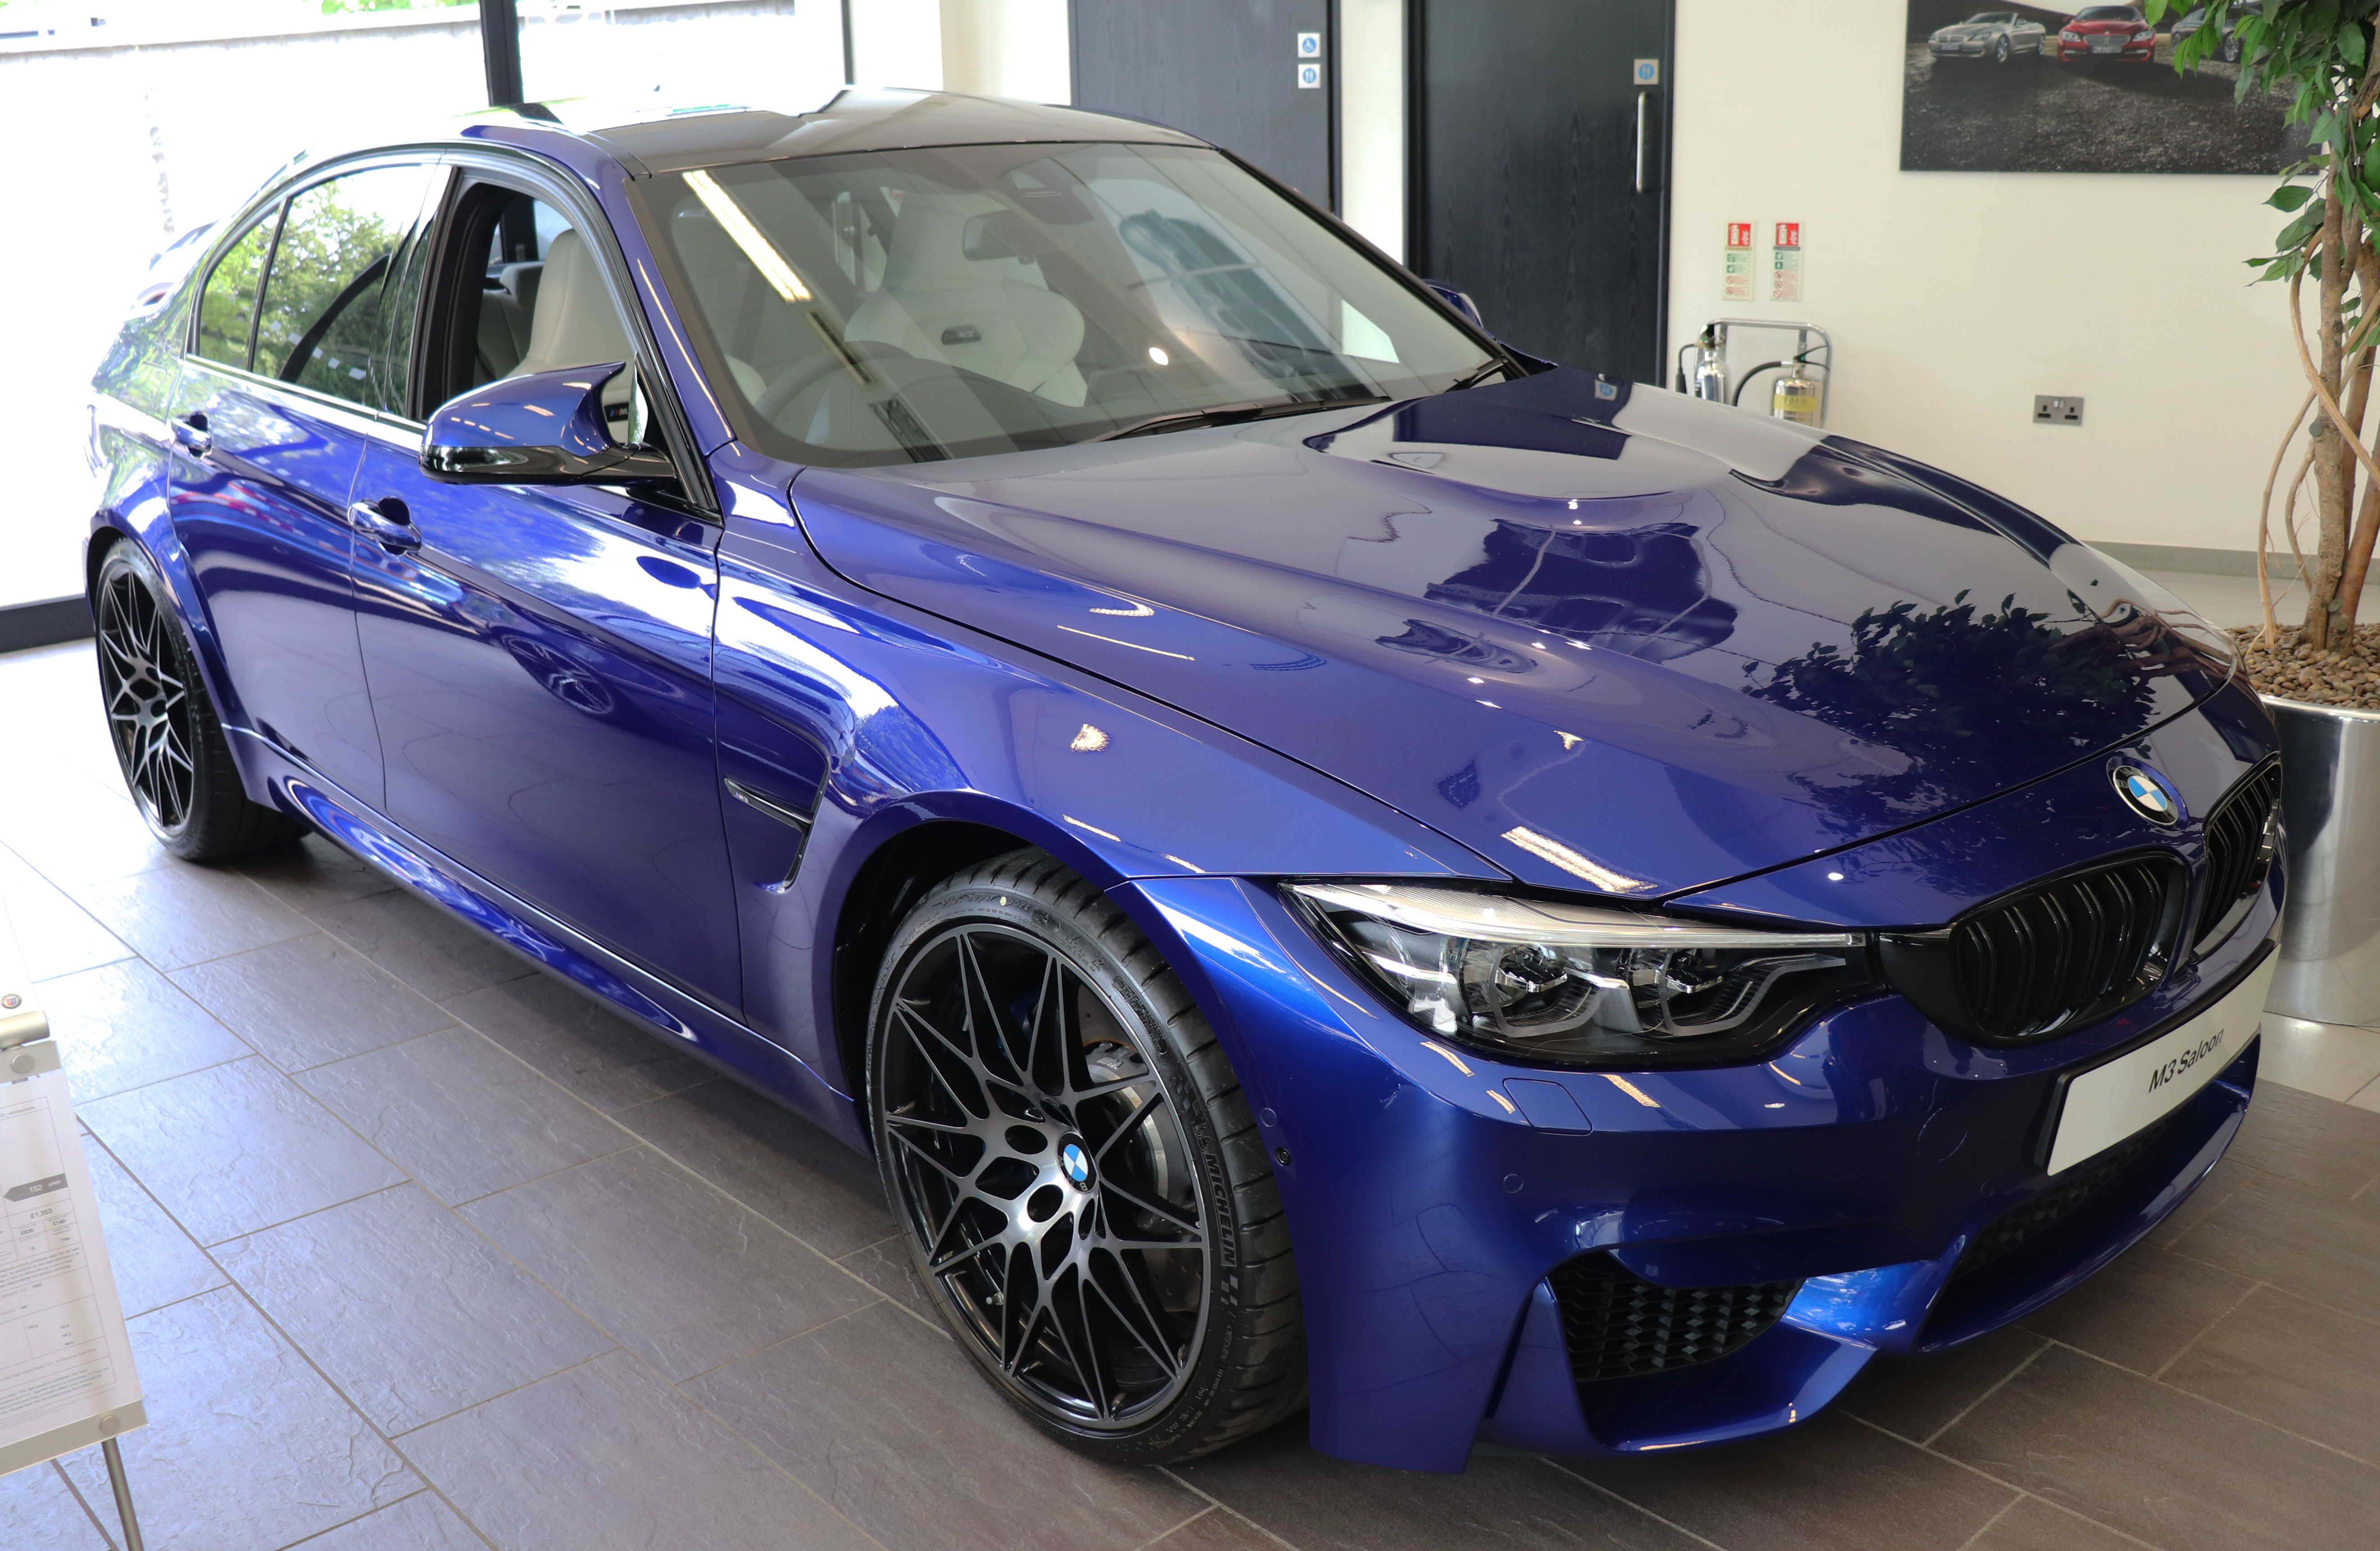 File:2018 BMW M3 Front.jpg - Wikimedia Commons